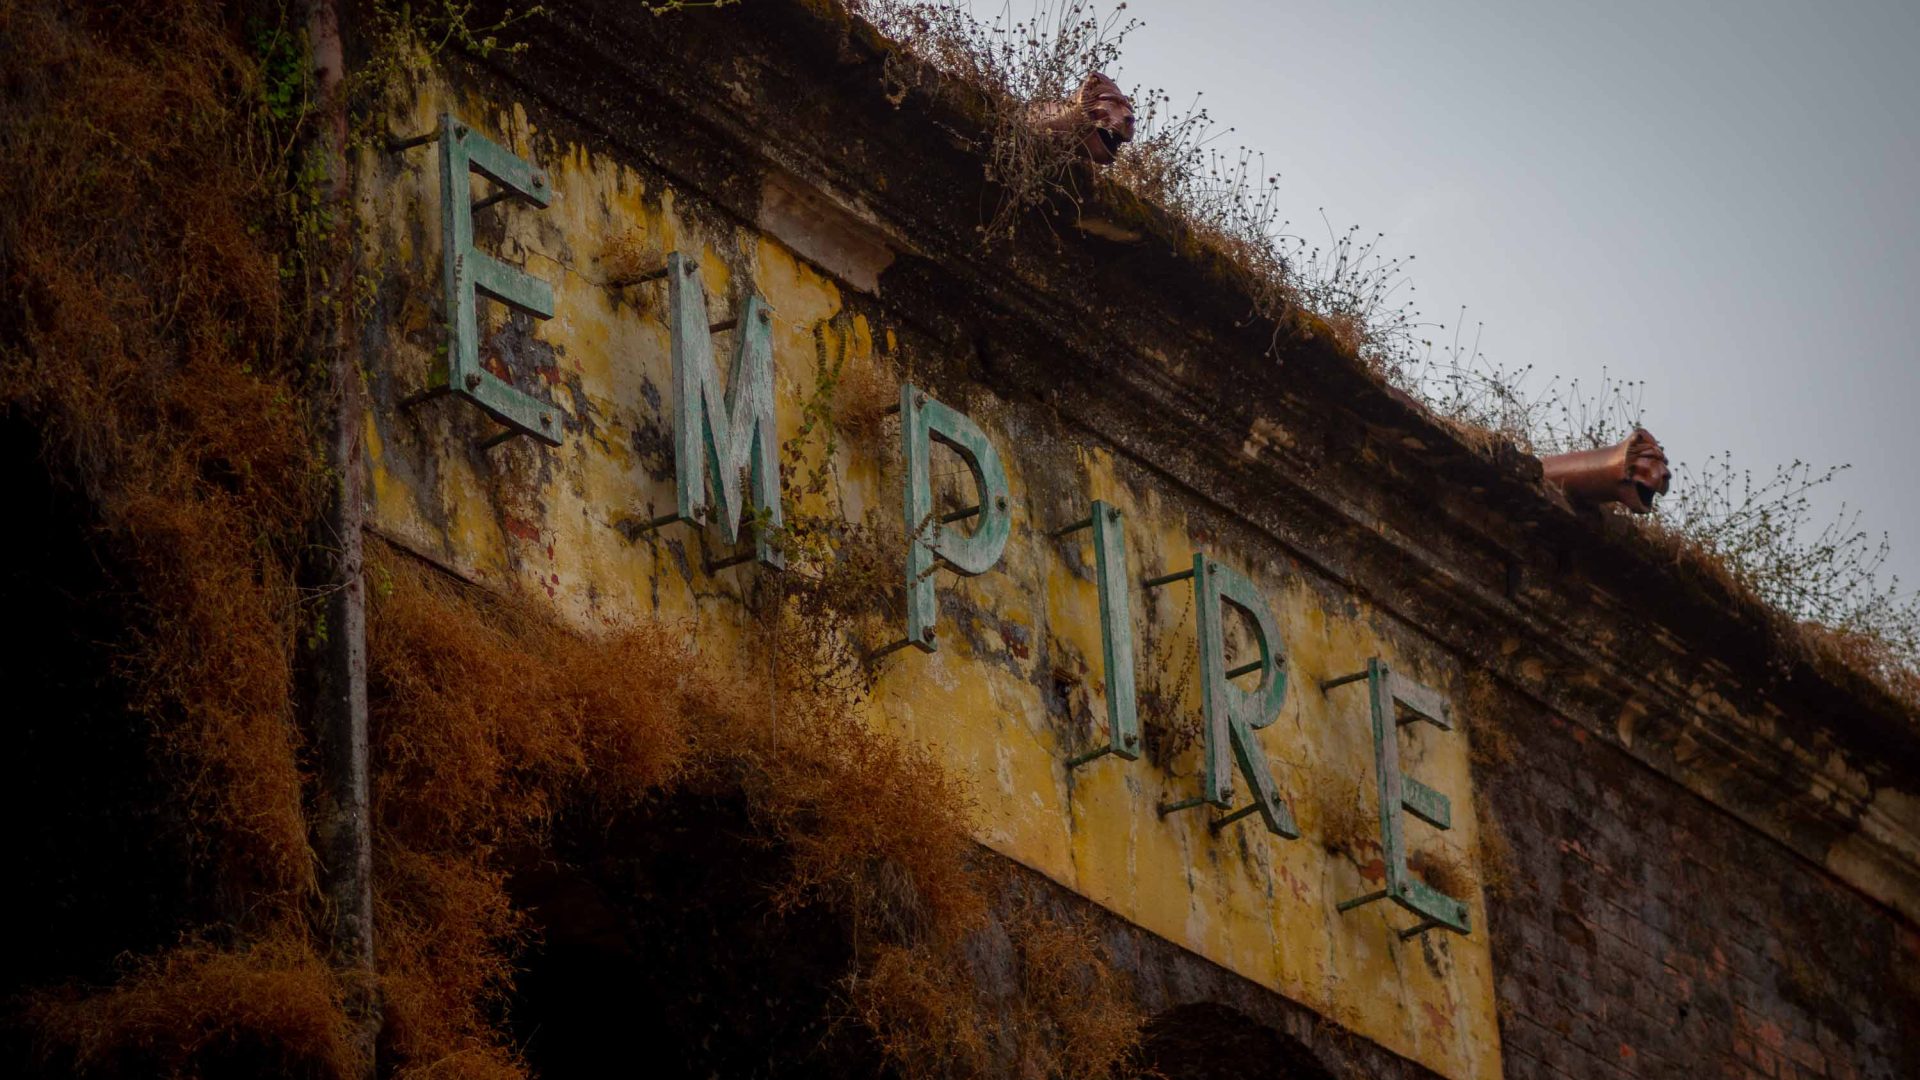 An old cinema sign that says Empire has plants growing over it.